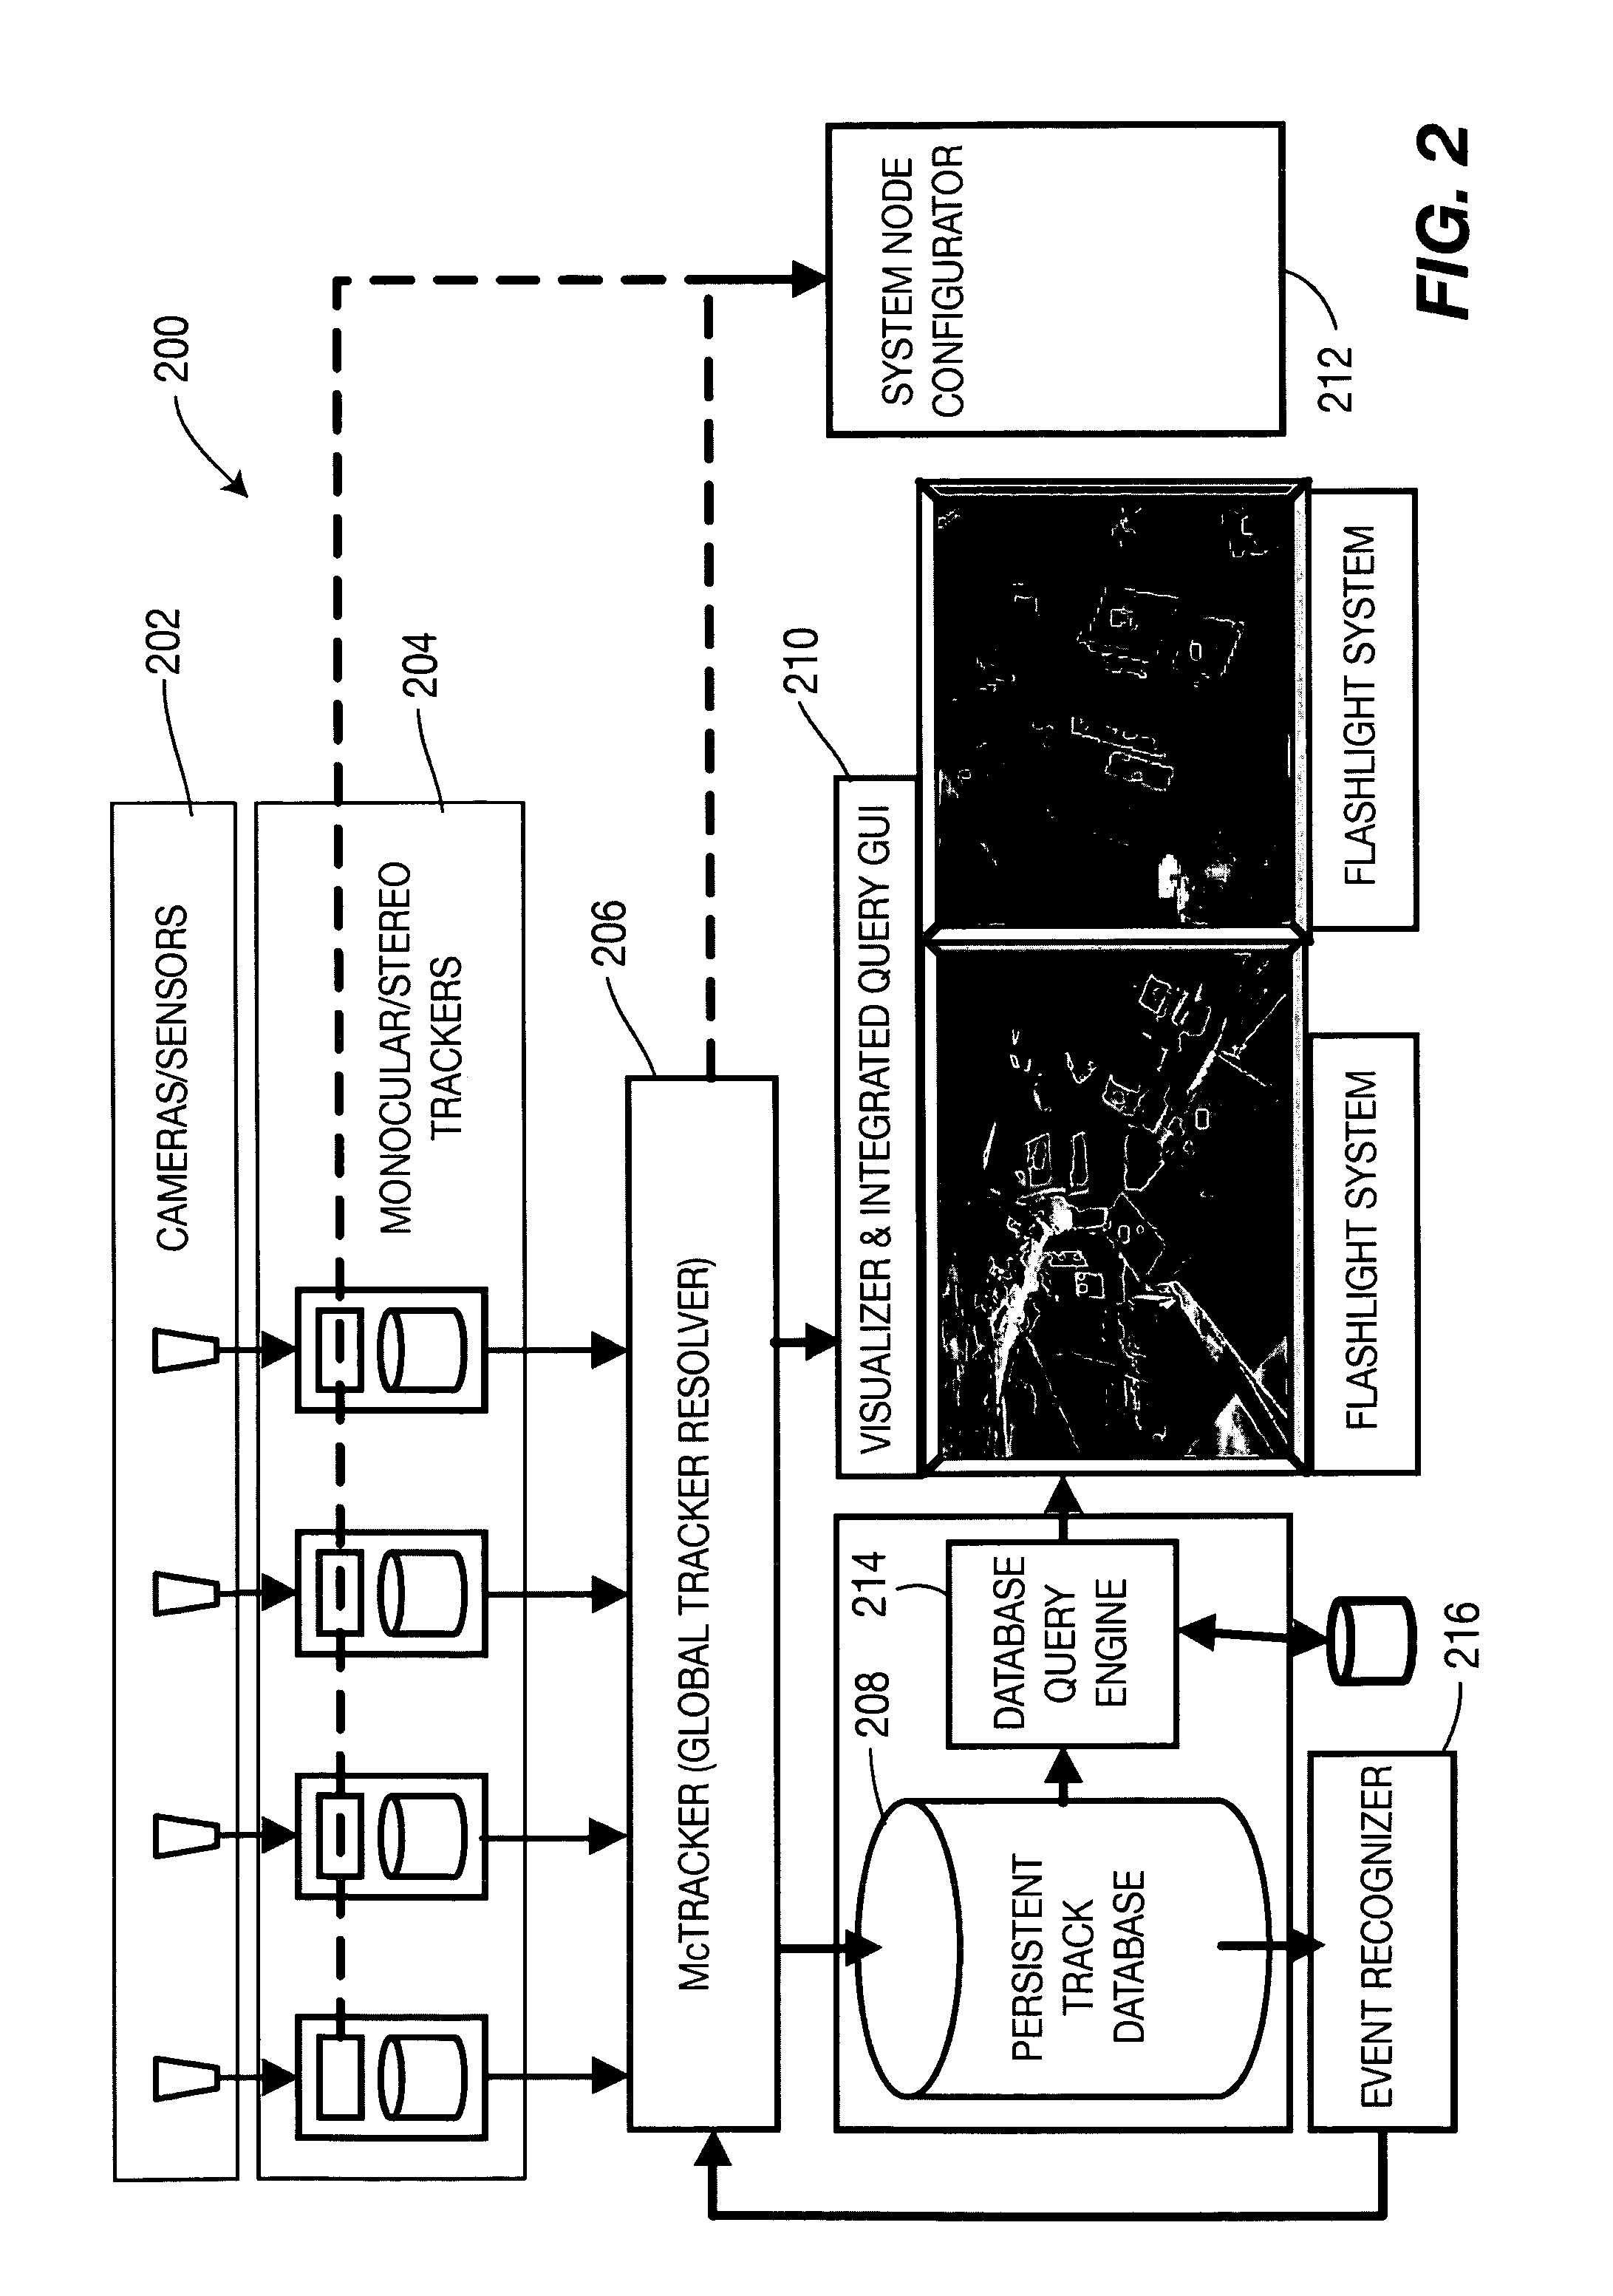 Method and apparatus for total situational awareness and monitoring